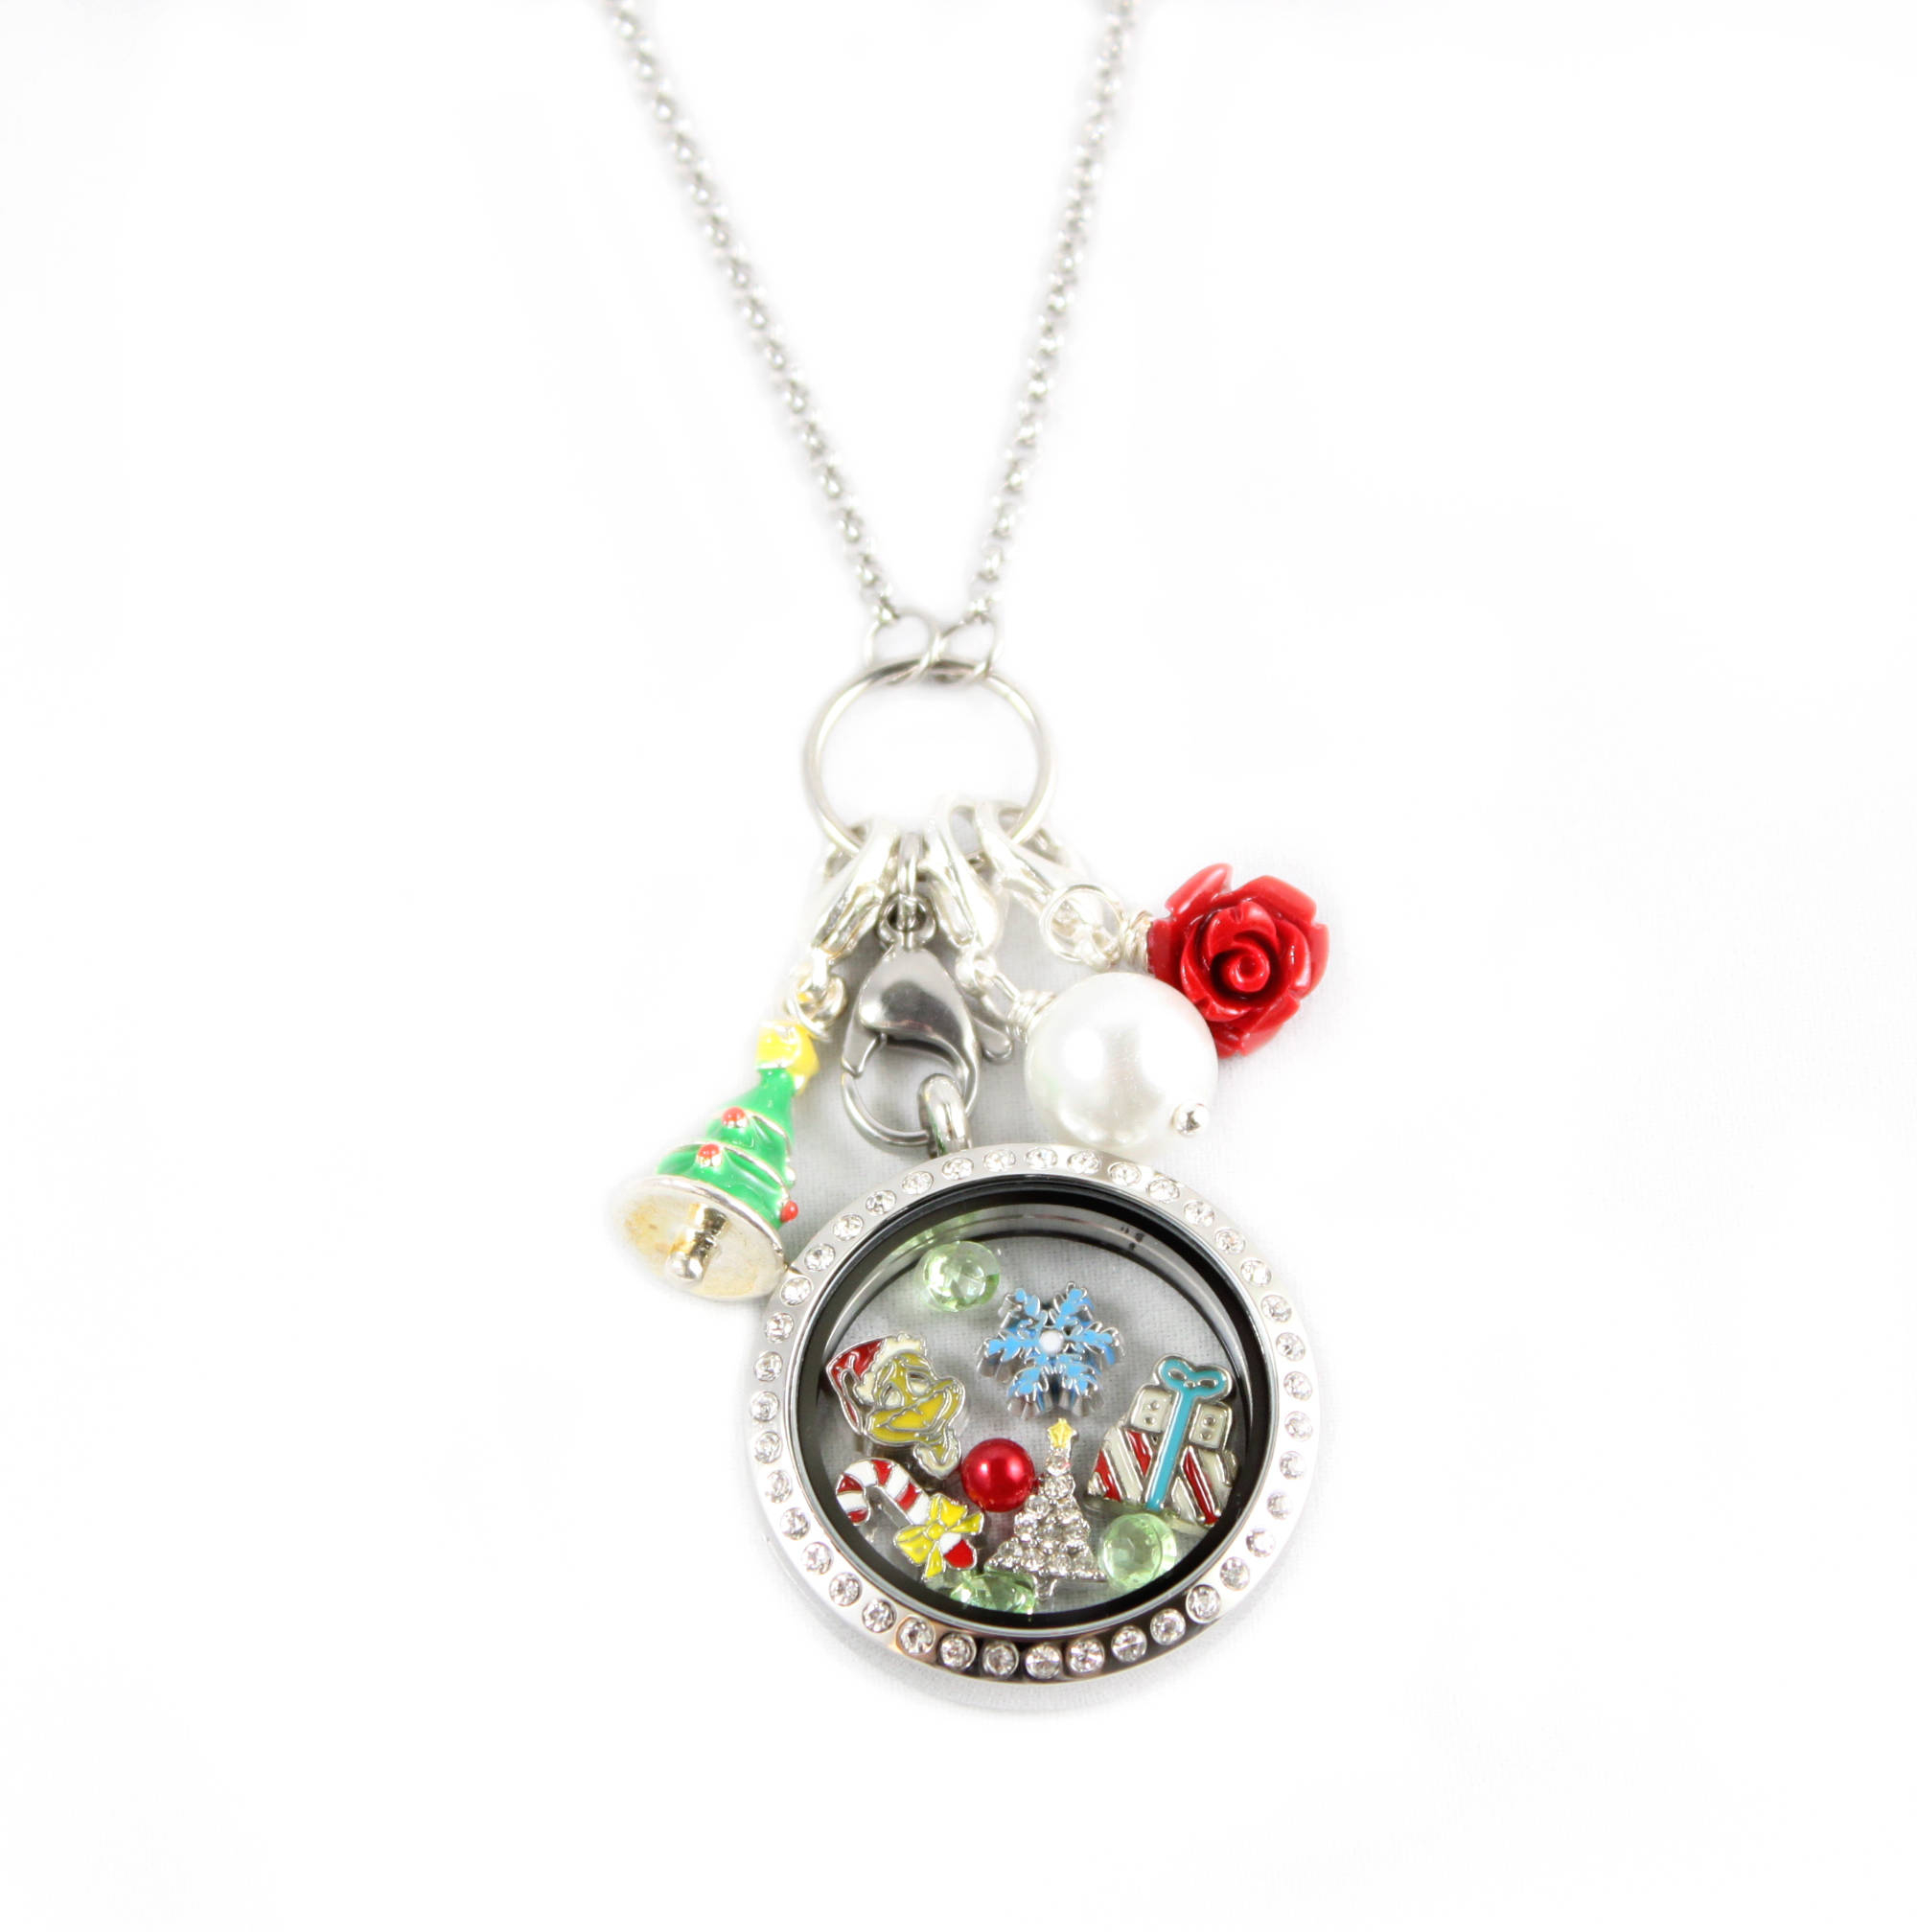 How Many Charms Fit In An Origami Owl Locket Mr Grinch Christmas Holiday Floating Locket And Charm Collection